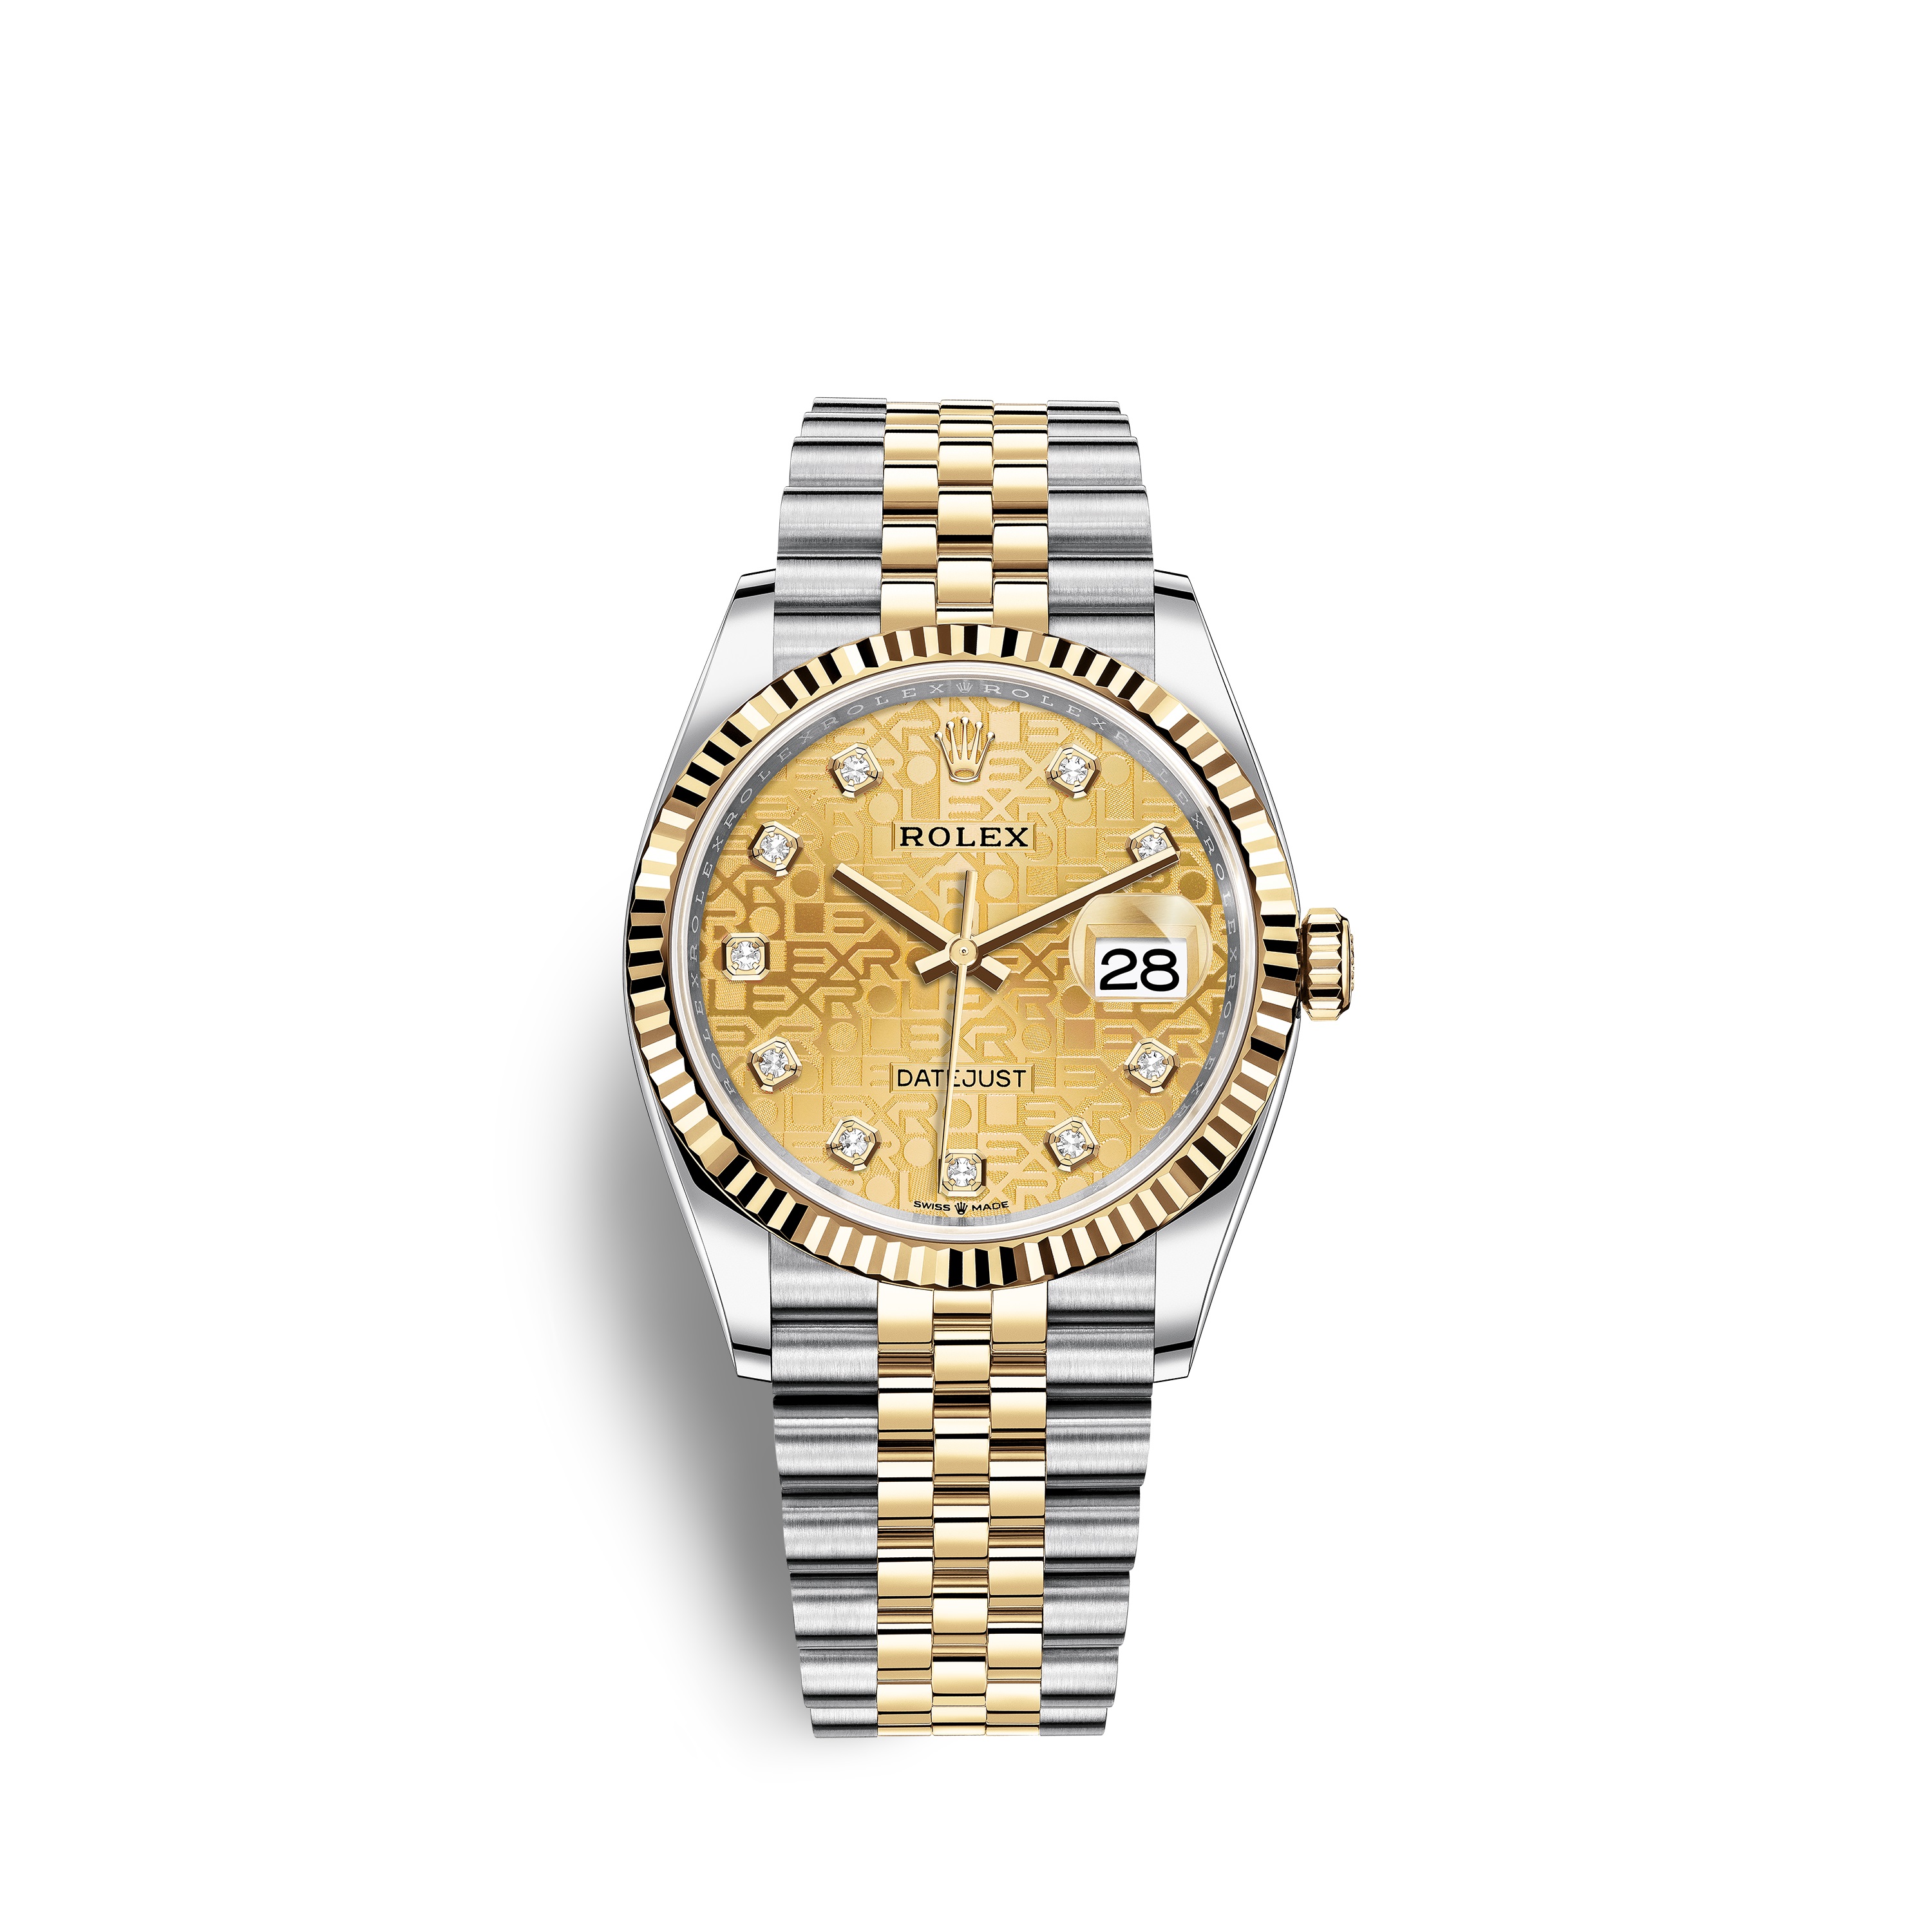 Datejust 36 126233 Gold & Stainless Steel Watch (Champagne-Colour Set with Diamonds)